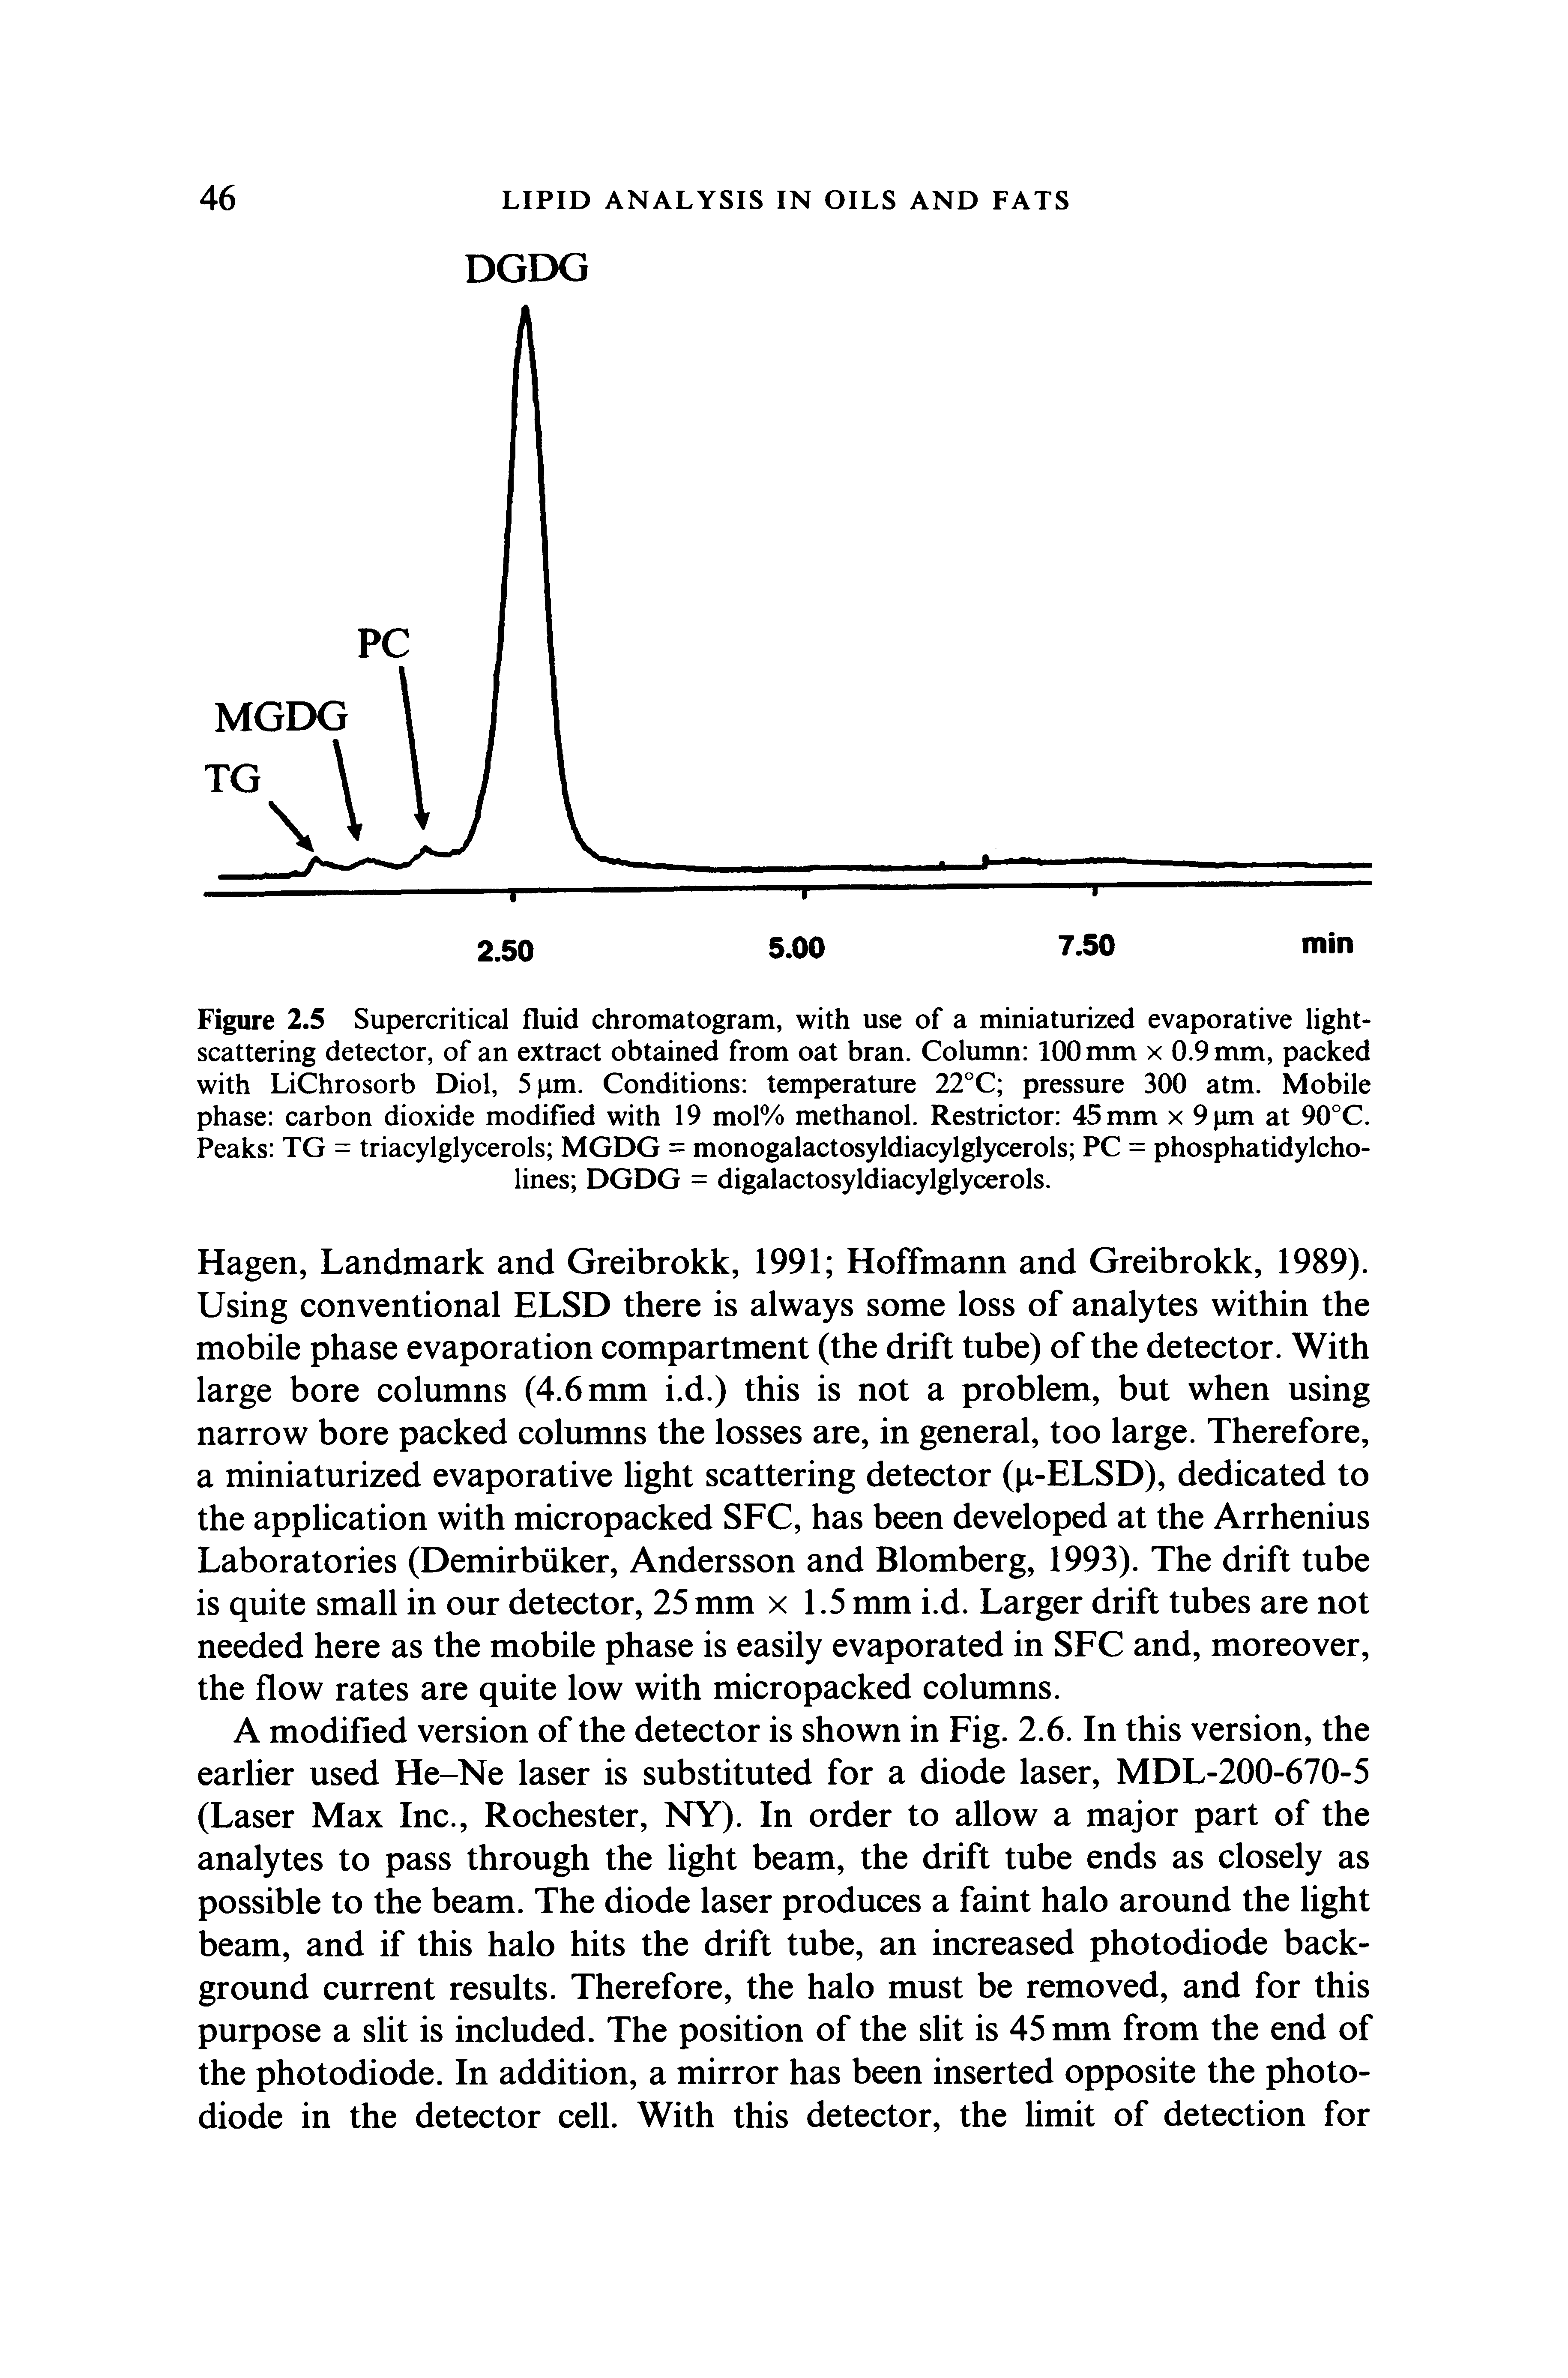 Figure 2.5 Supercritical fluid chromatogram, with use of a miniaturized evaporative lightscattering detector, of an extract obtained from oat bran. Column 100 nun x 0.9 mm, packed with LiChrosorb Diol, 5 pm. Conditions temperature 22°C pressure 300 atm. Mobile phase carbon dioxide modified with 19 mol% methanol. Restrictor 45 mm x 9 pm at 90°C. Peaks TG = triacylglycerols MGDG = monogalactosyldiacylglycerols PC = phosphatidylcholines DGDG = digalactosyldiacylglycerols.